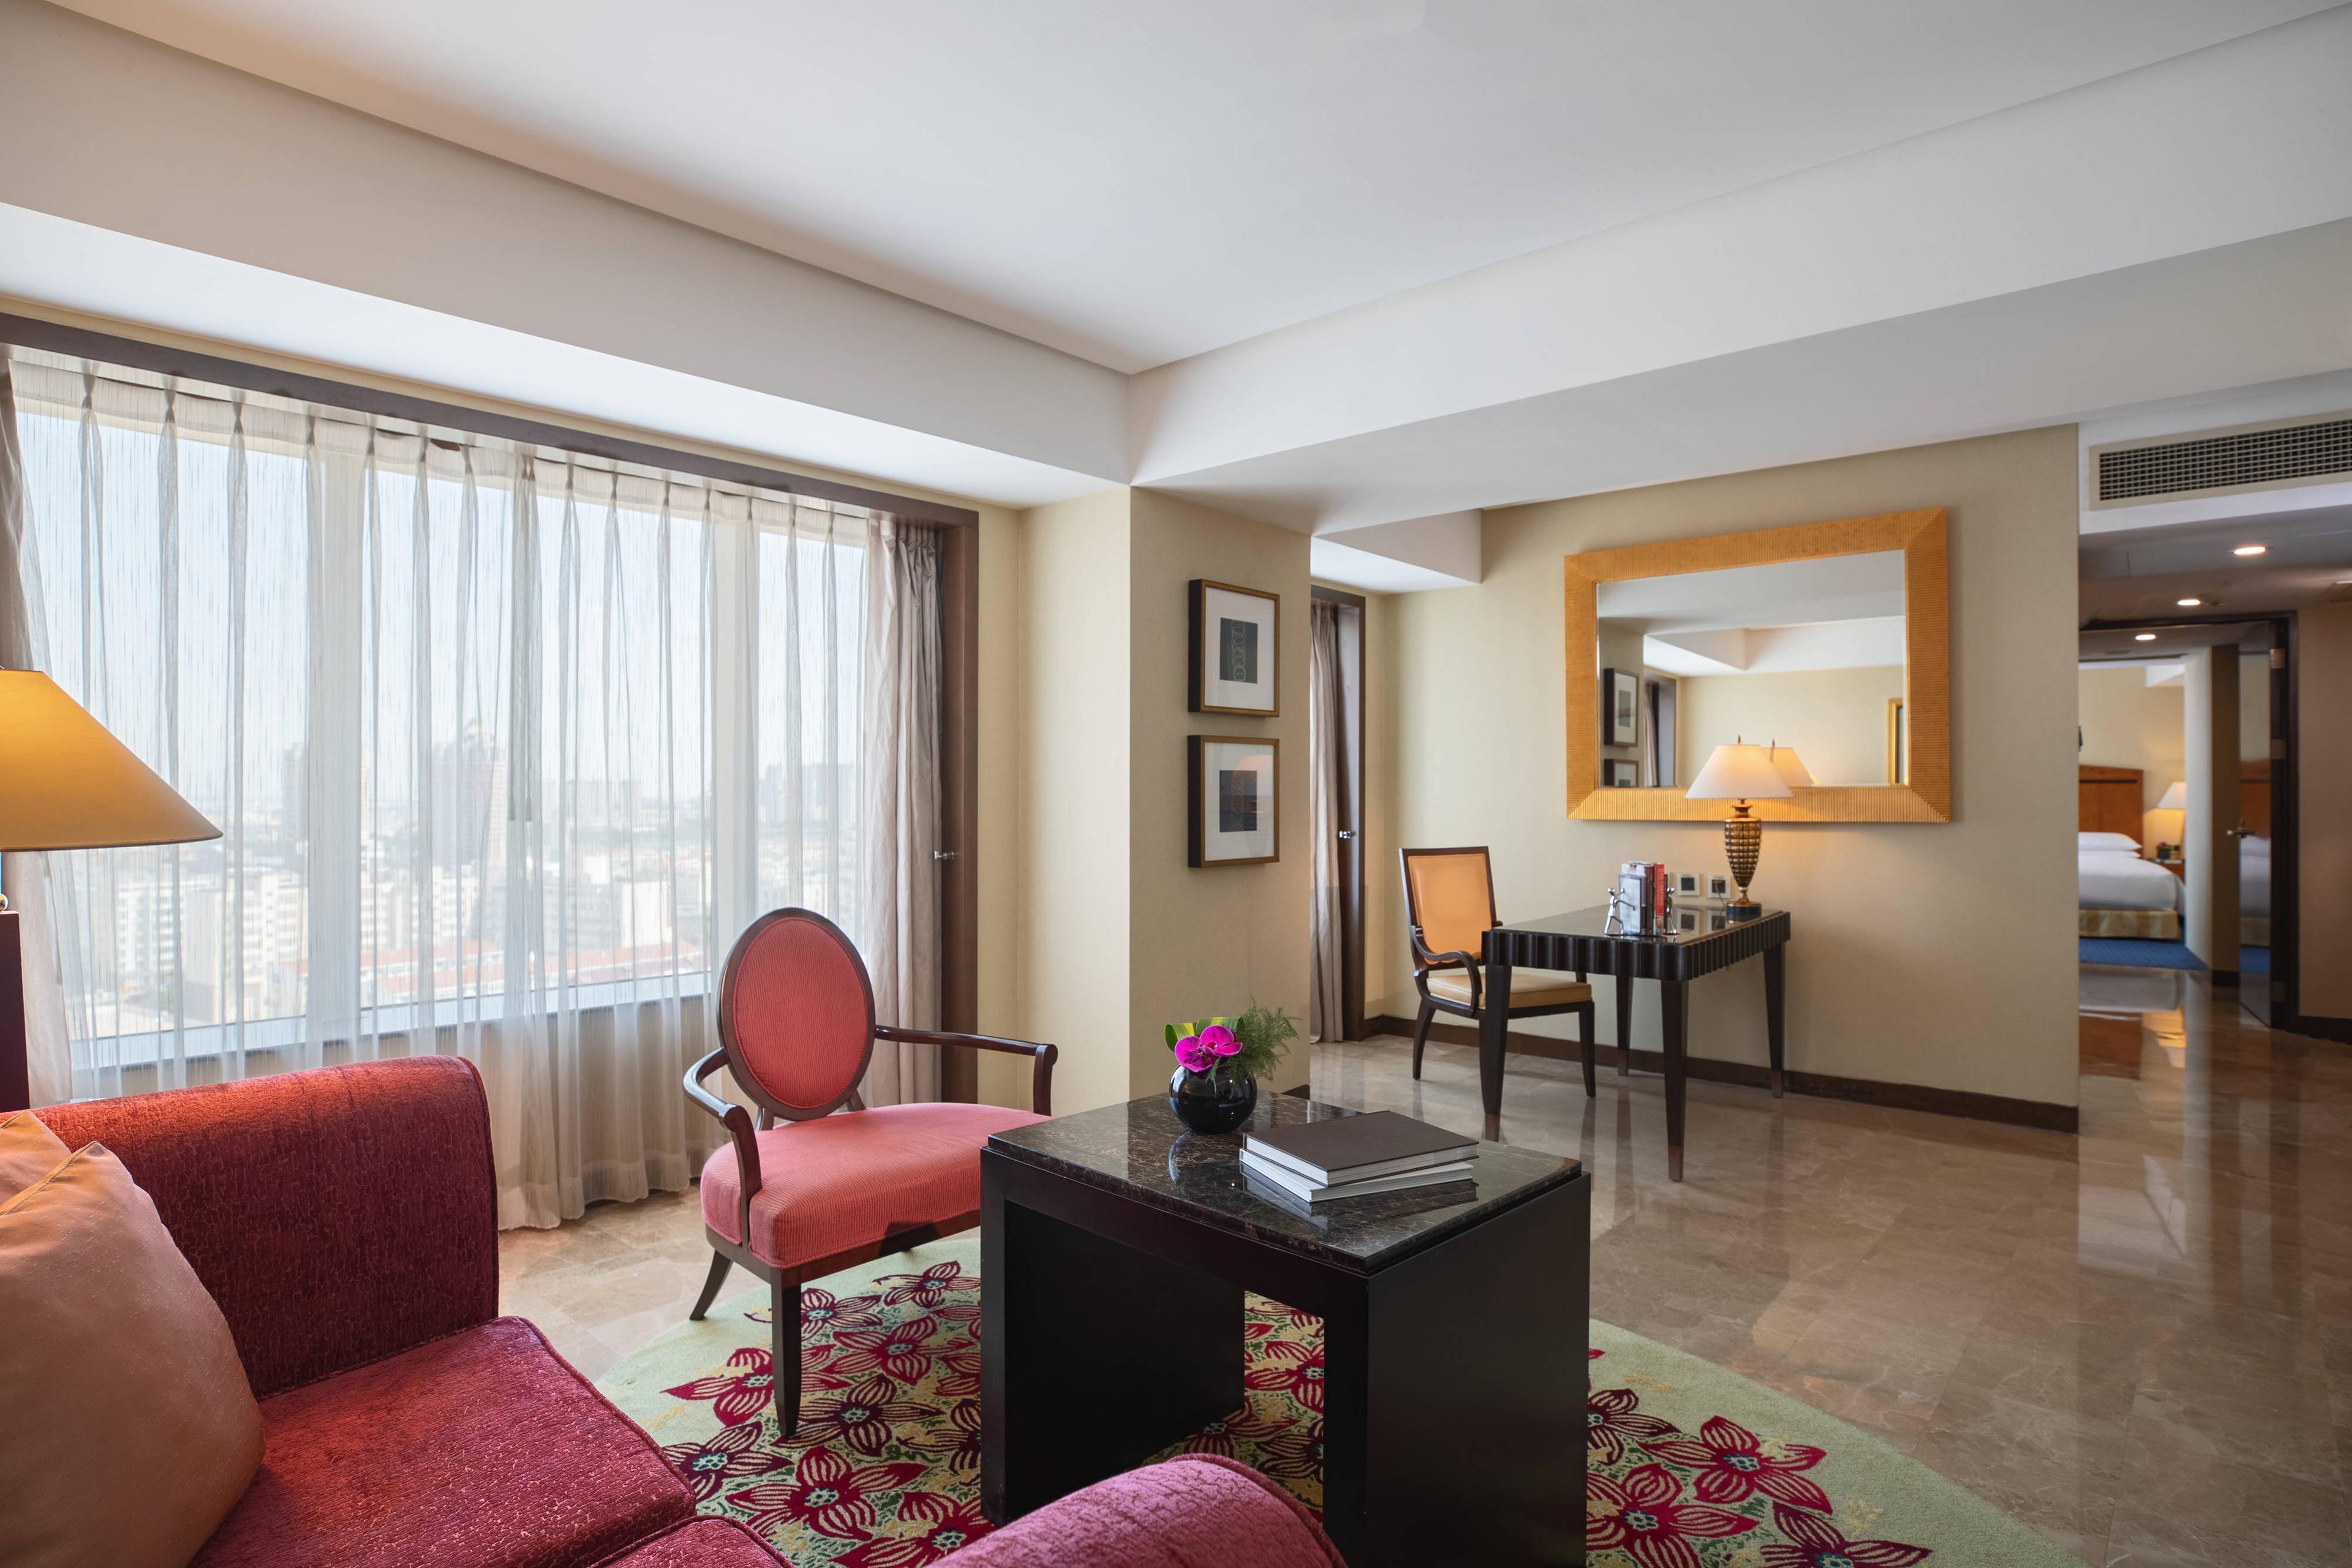 The Junior Suite has one bedroom and one living room, spacious and comfortable.